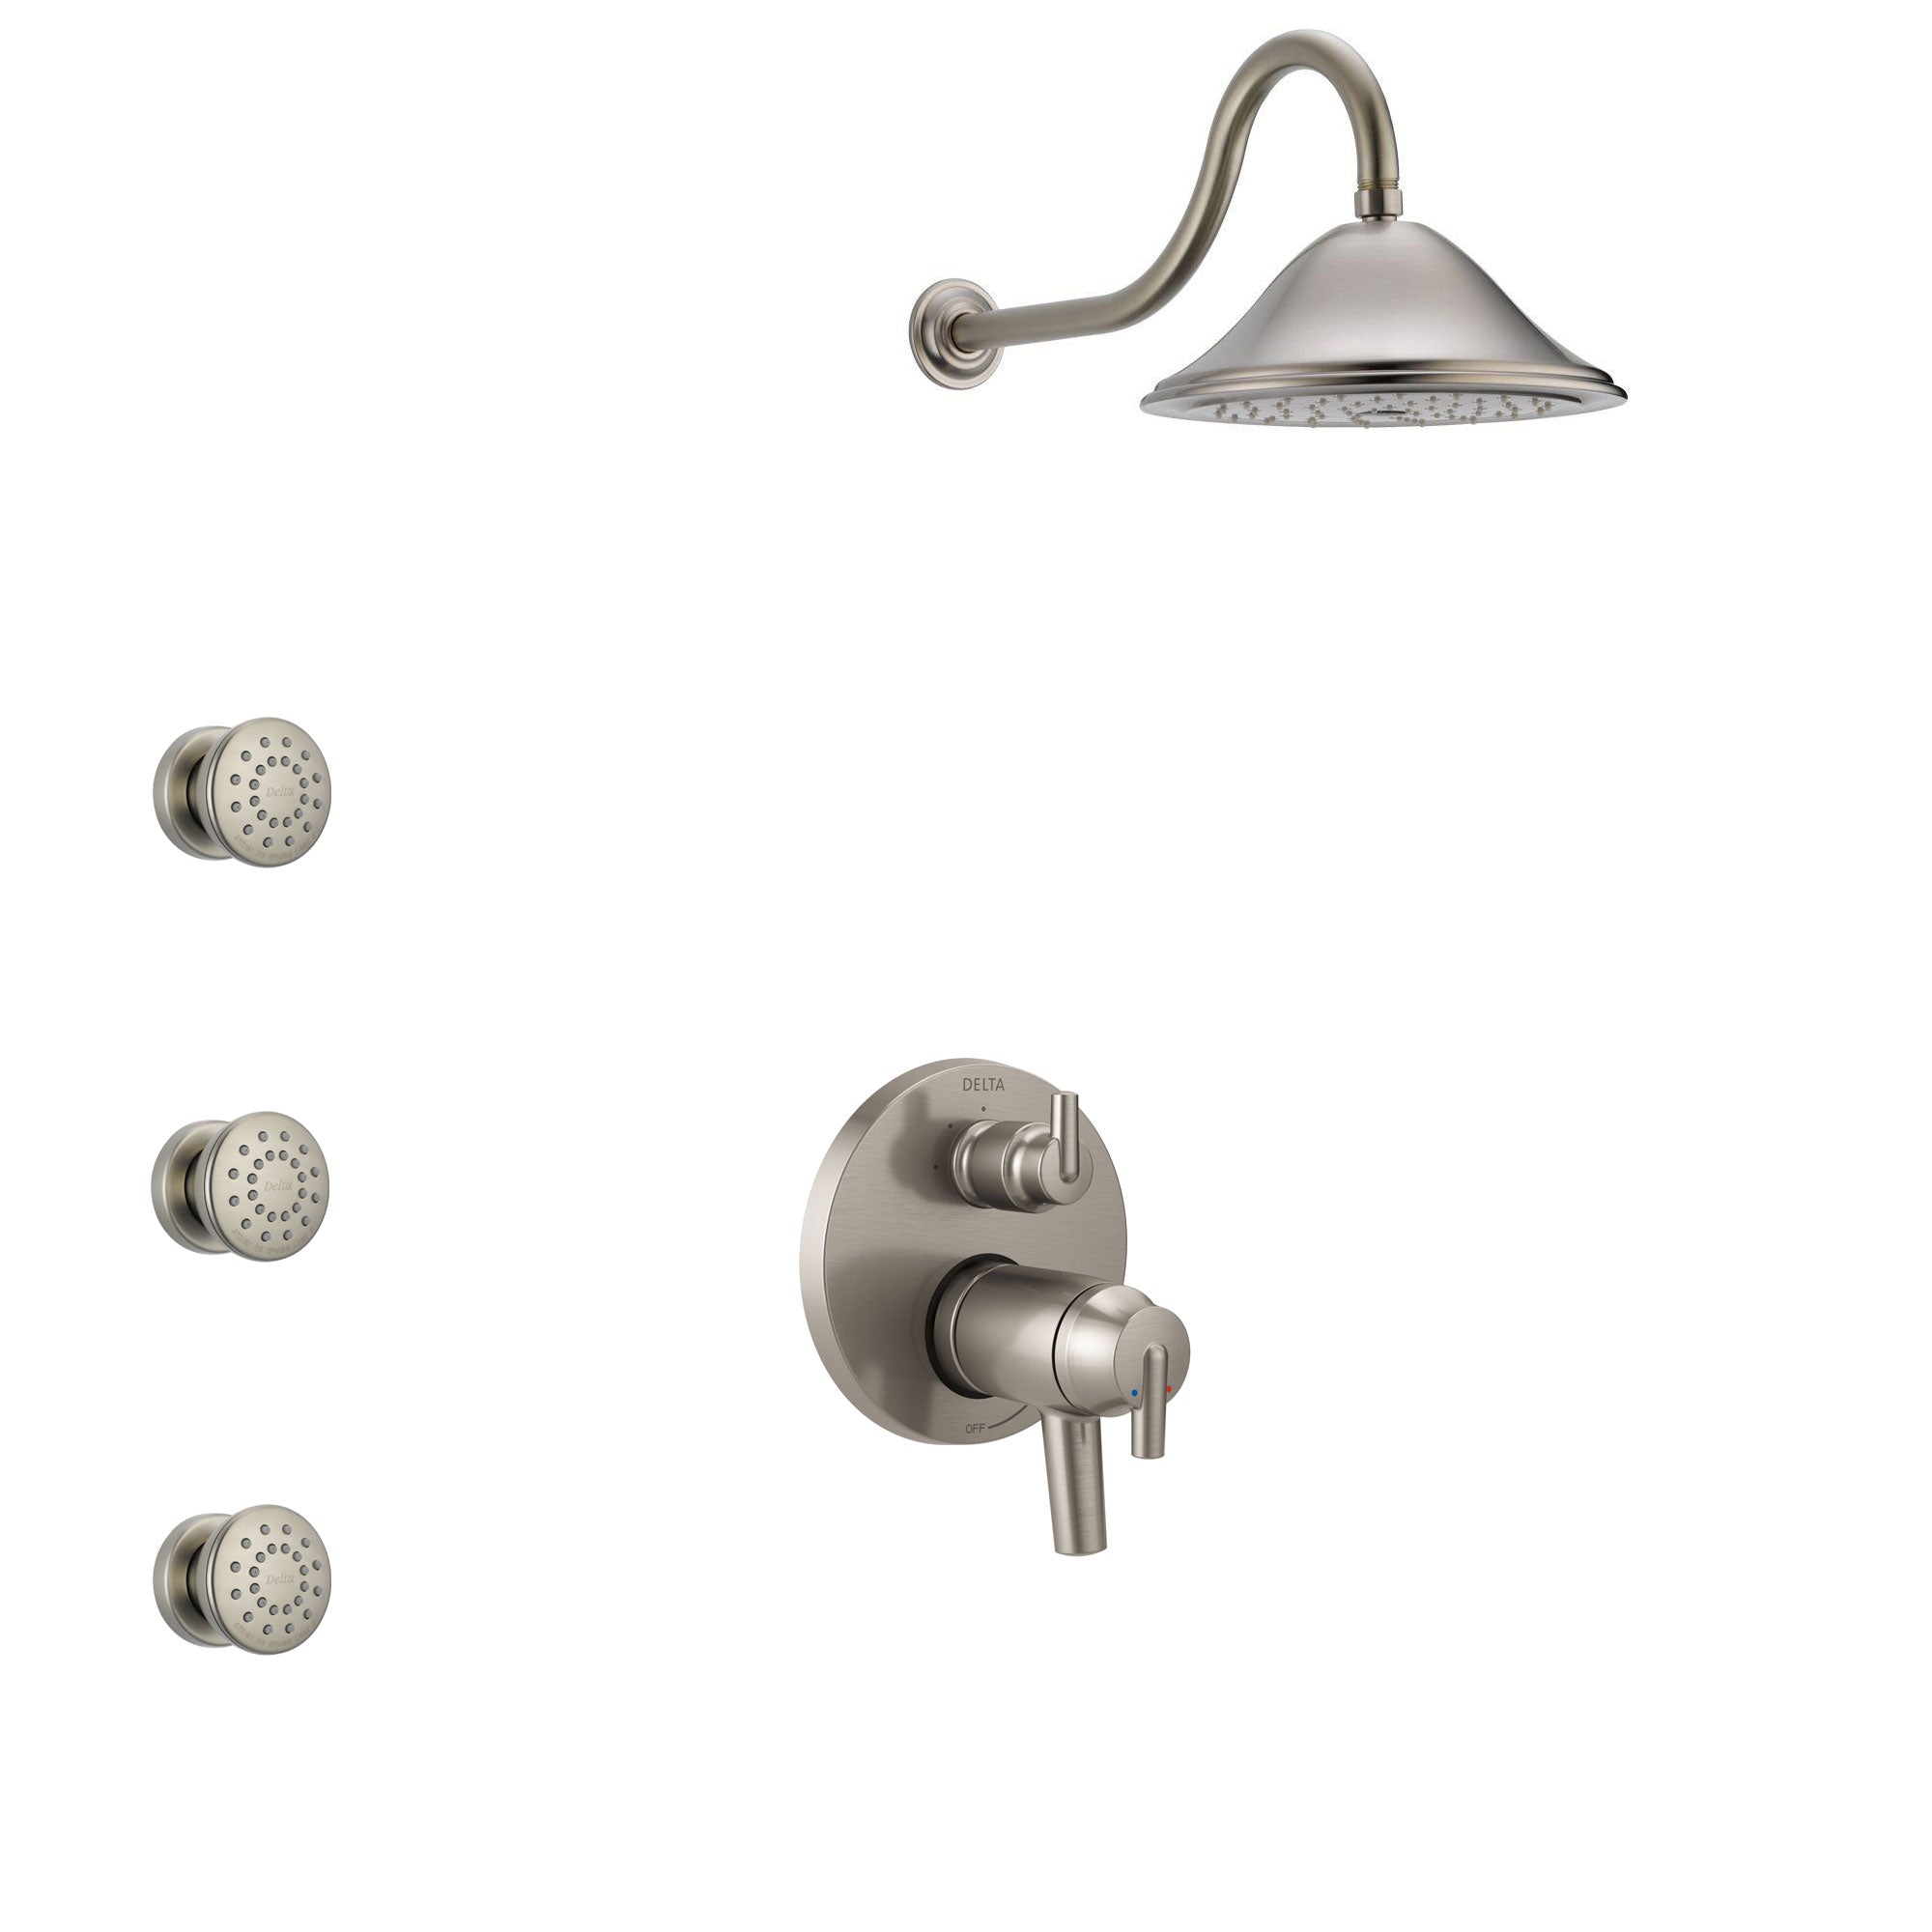 Delta Trinsic Dual Thermostatic Control Handle Stainless Steel Finish Shower System, Integrated Diverter, Showerhead, and 3 Body Sprays SS27T859SS2